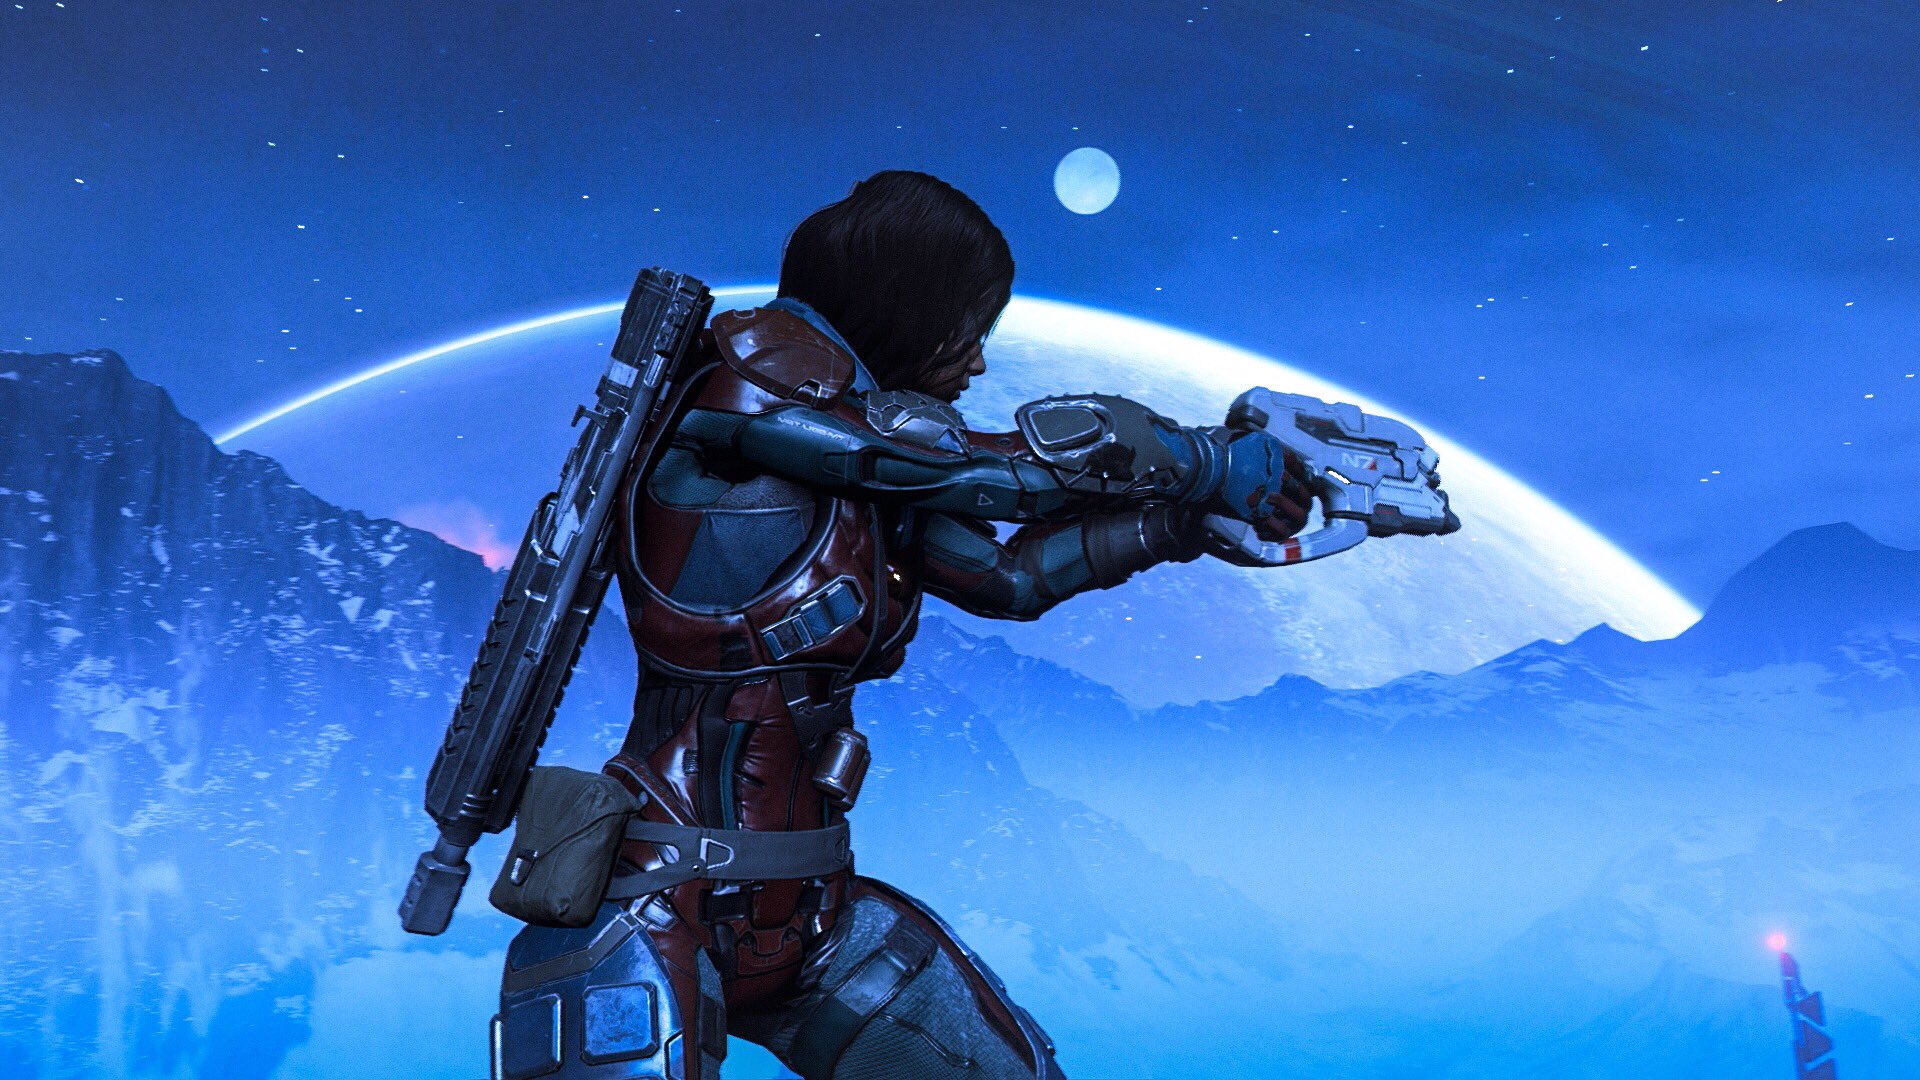 Mass Effect Andromeda - 4 New Gameplay Screenshots Released, Shows Character Models Detail1920 x 1080